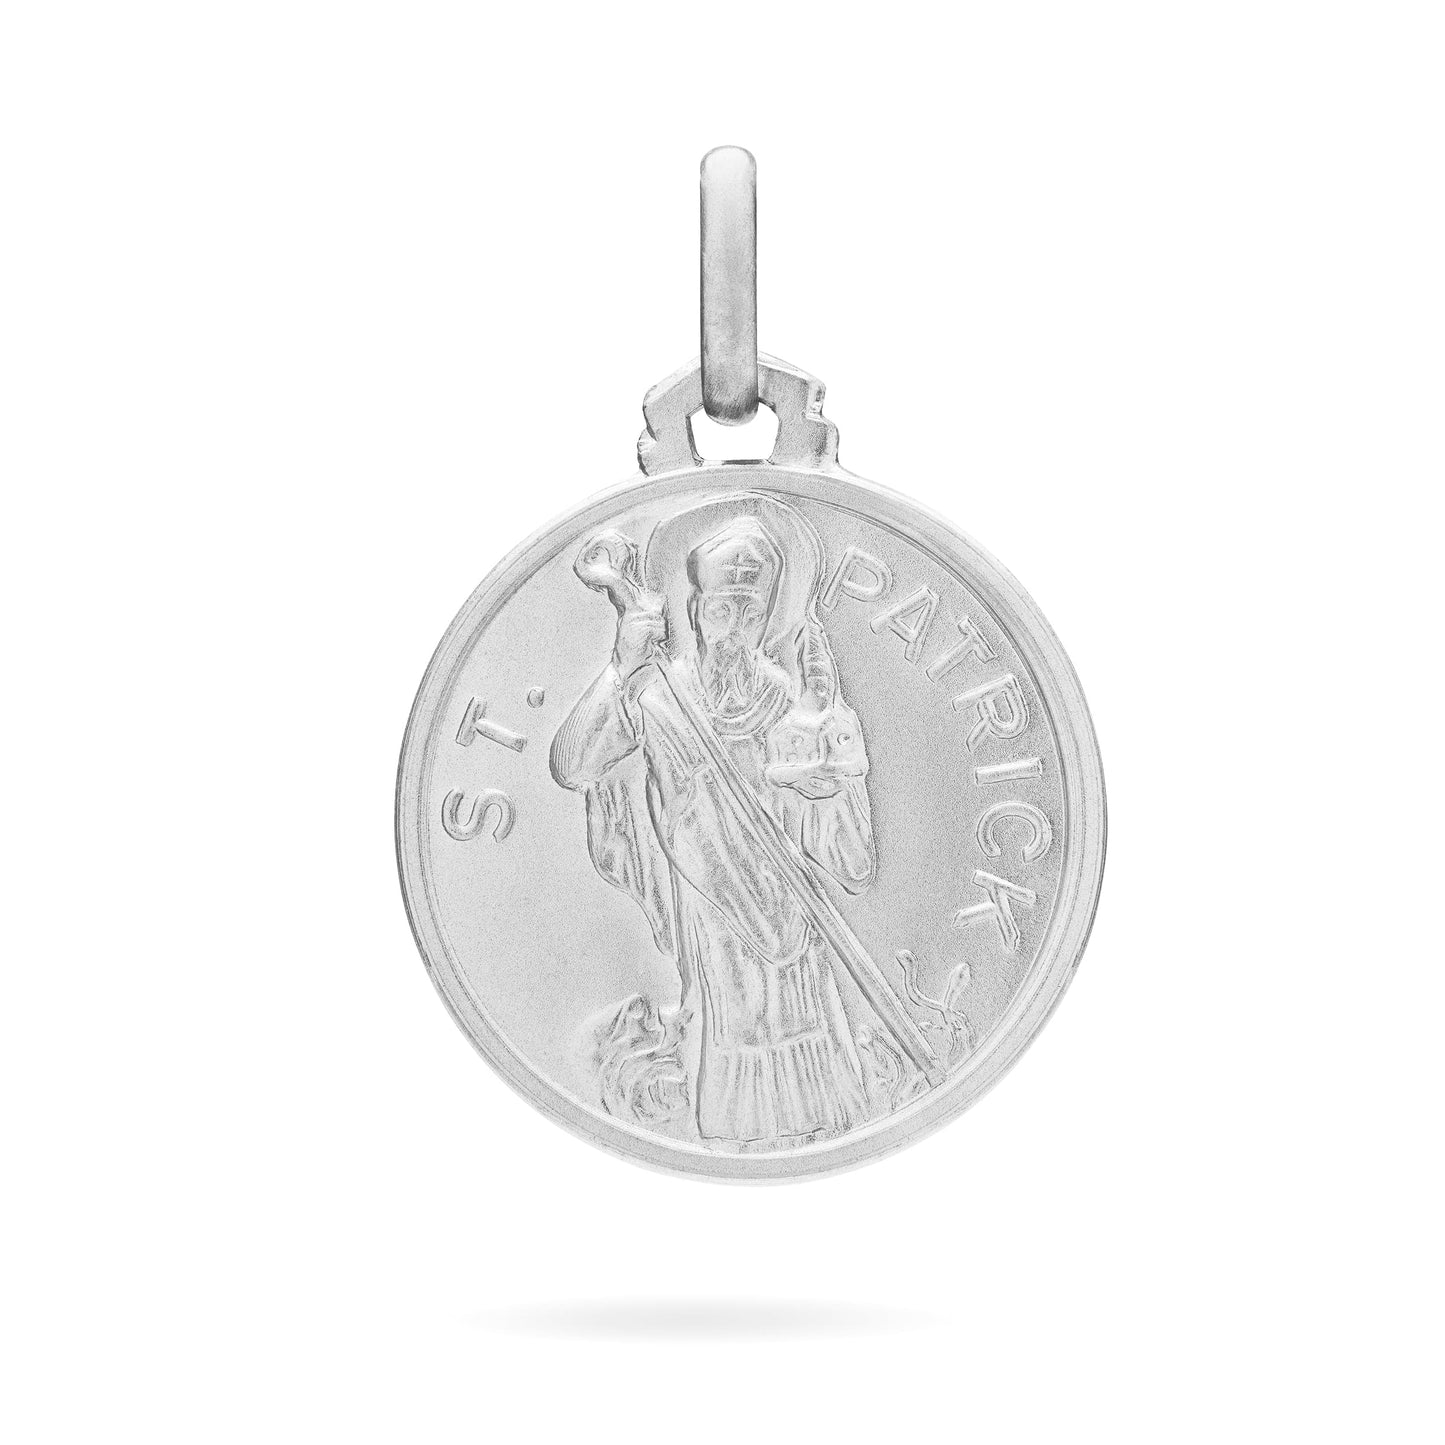 MONDO CATTOLICO Medal 18 mm (0.70 in) Sterling Silver Medal of Saint Patrick